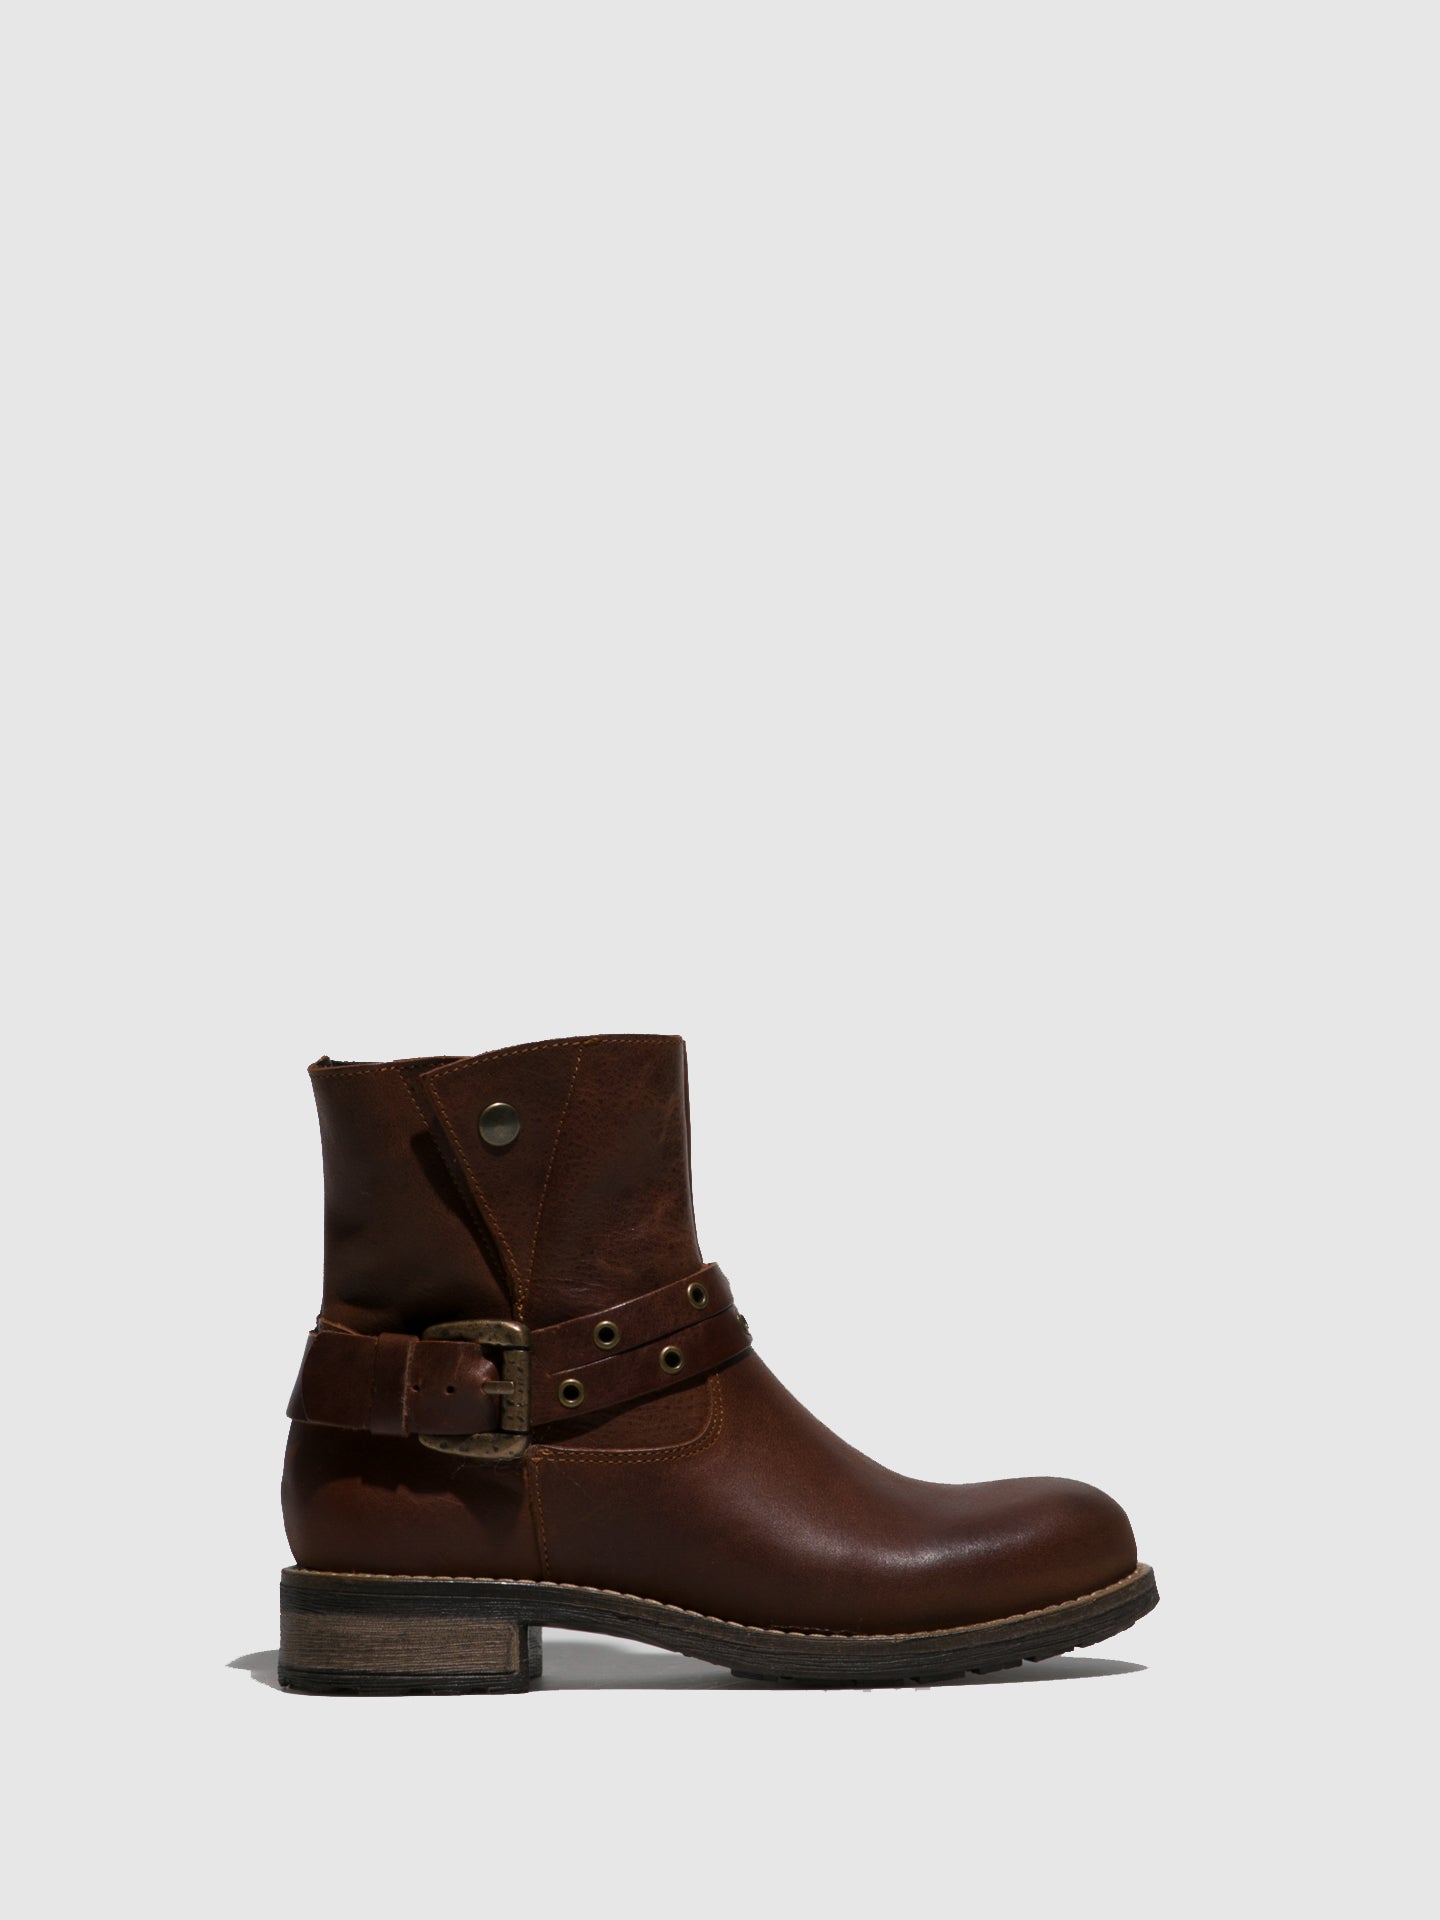 Fungi Brown Buckle Ankle Boots